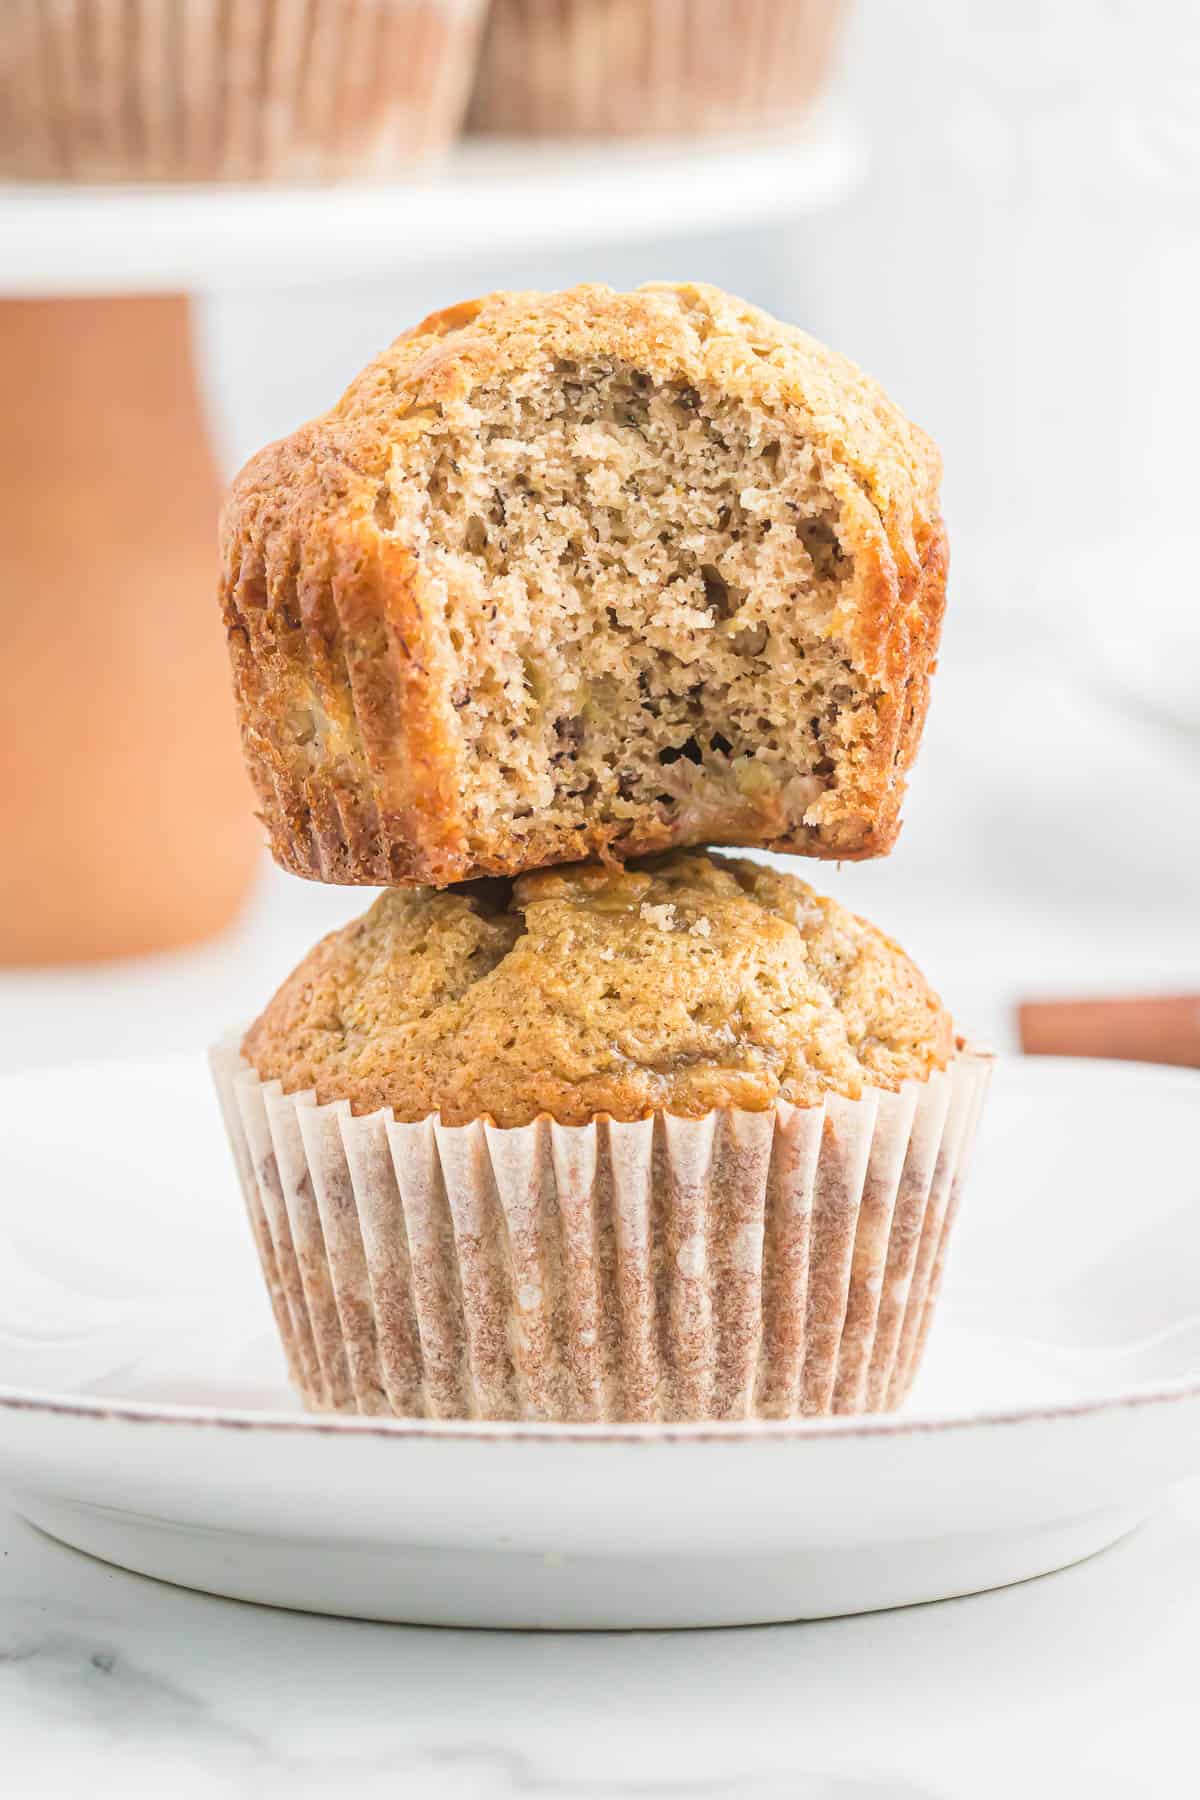 banana bread muffin with a bite taken out